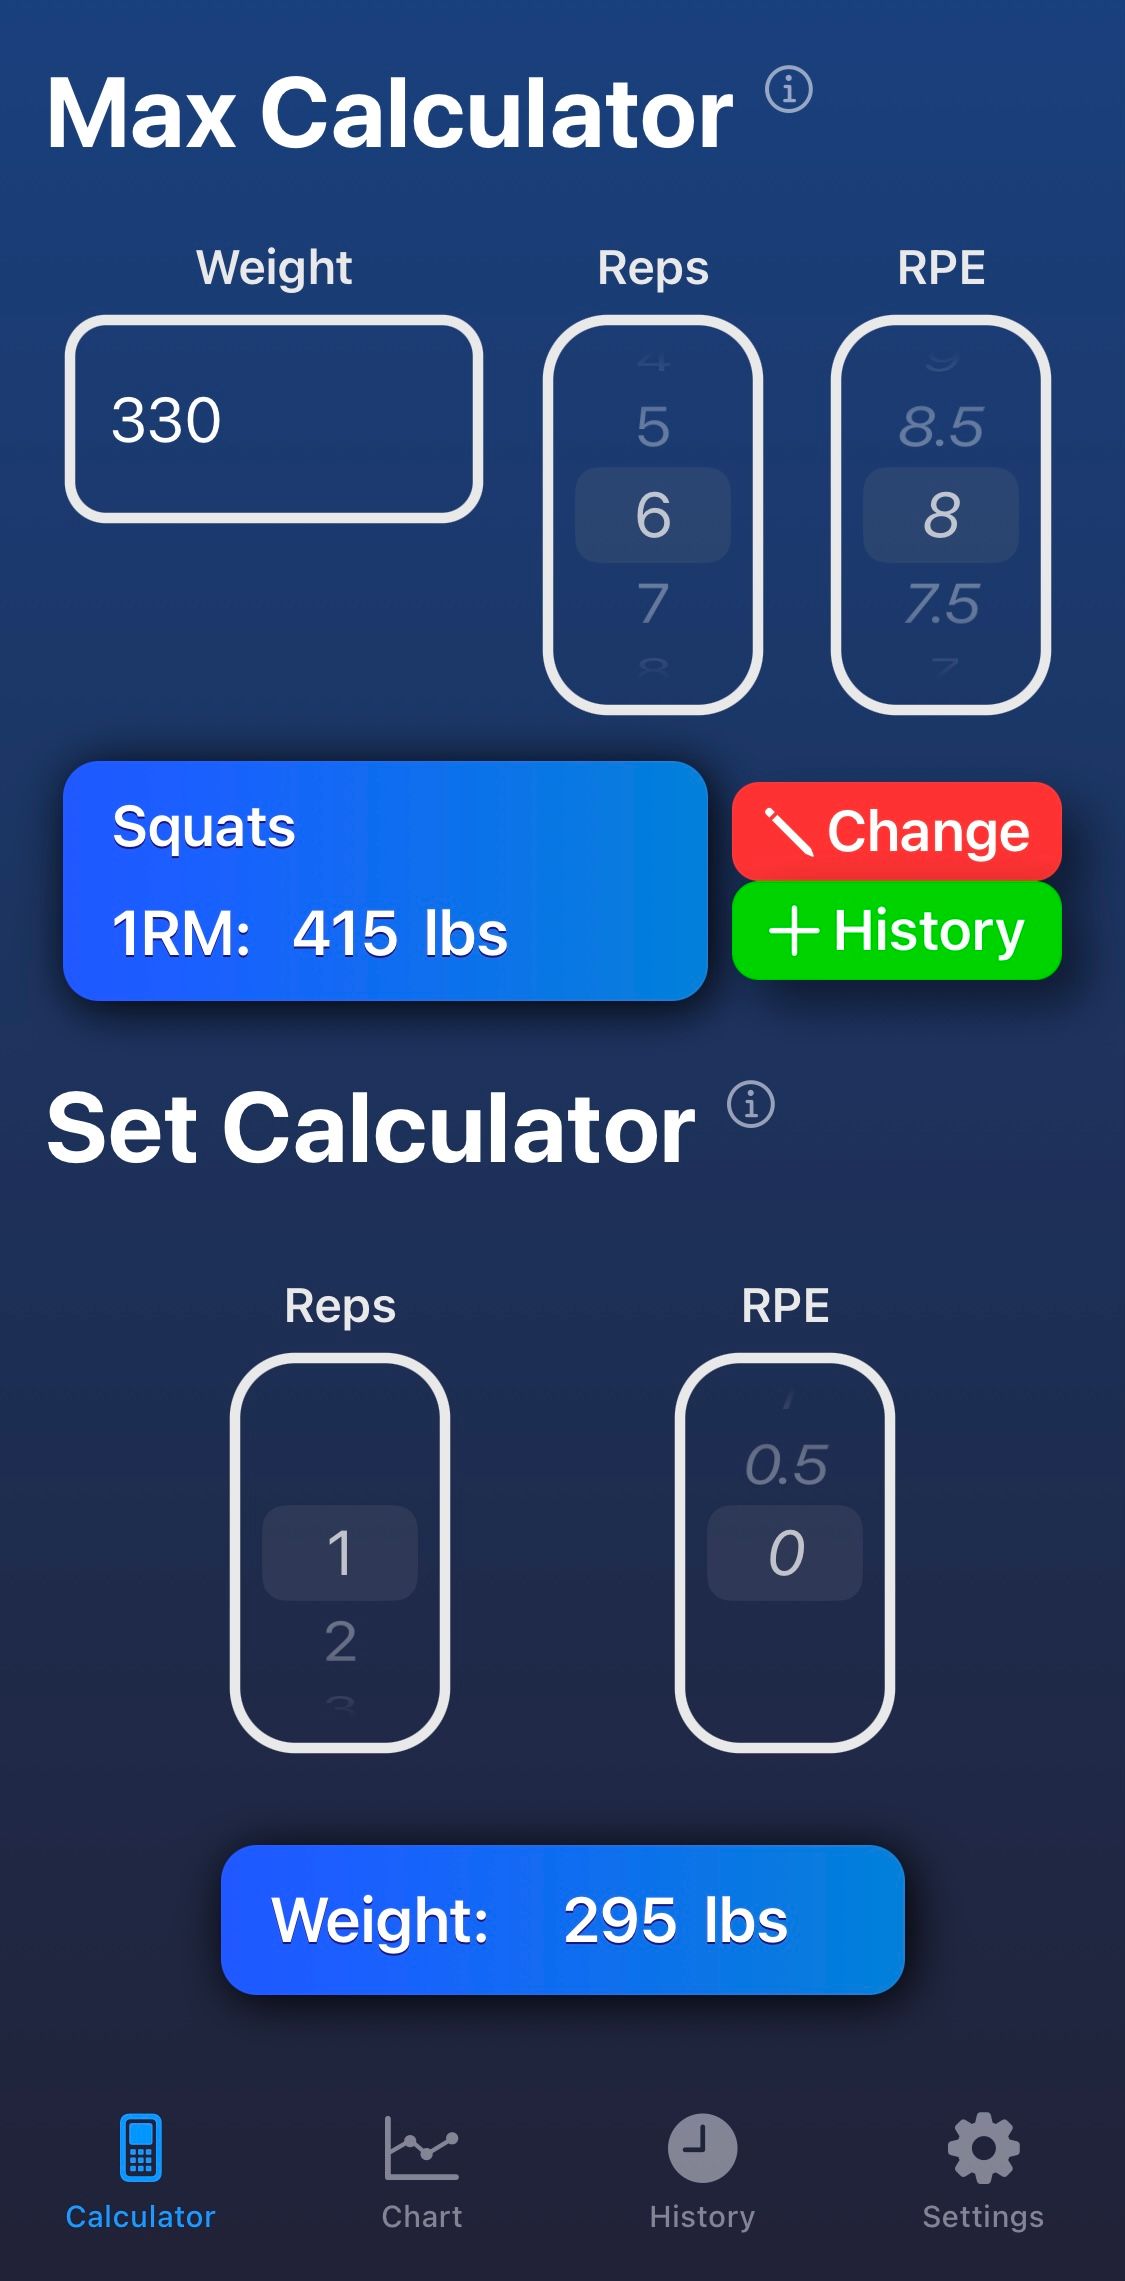 Maximum after inputting weight, reps, and RPE from last set